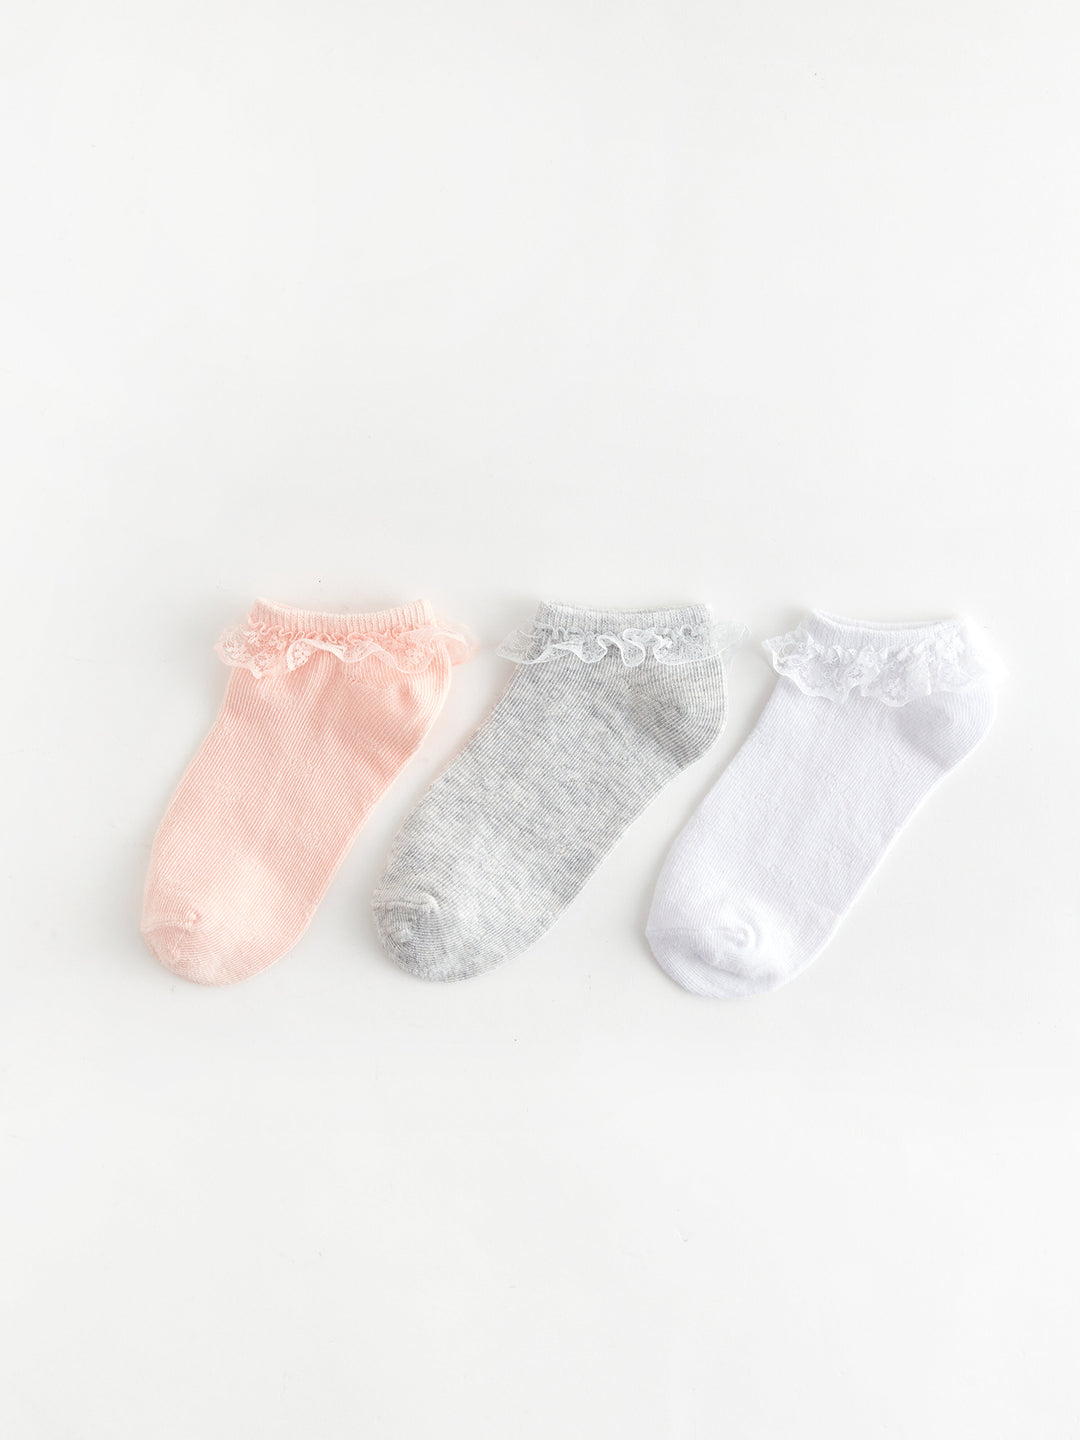 Lace Detailed Girls Booties Socks 3-Piece